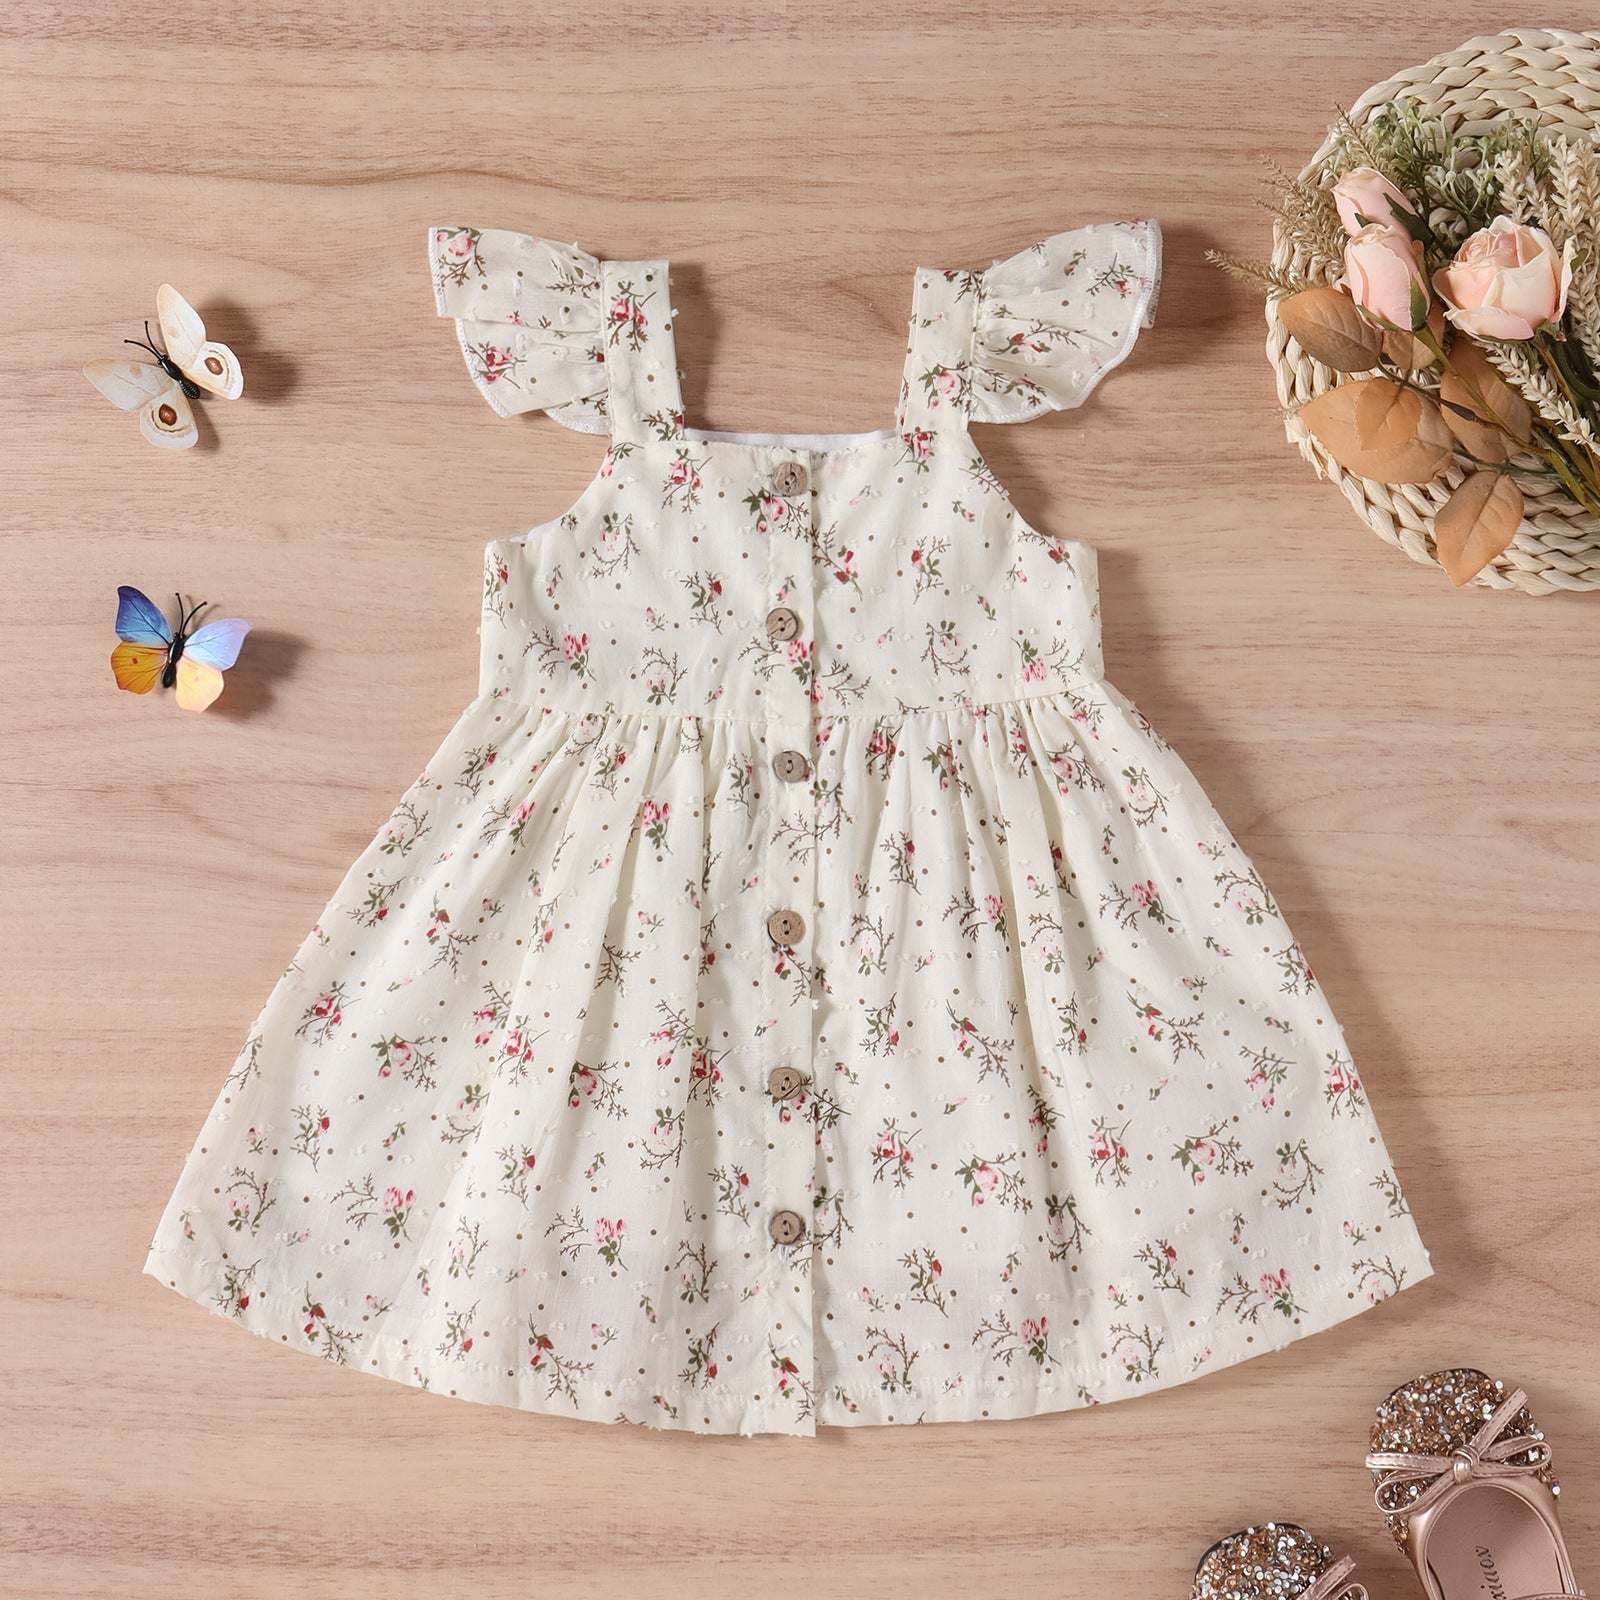 Girls' Clothing, Shoes & Accessories